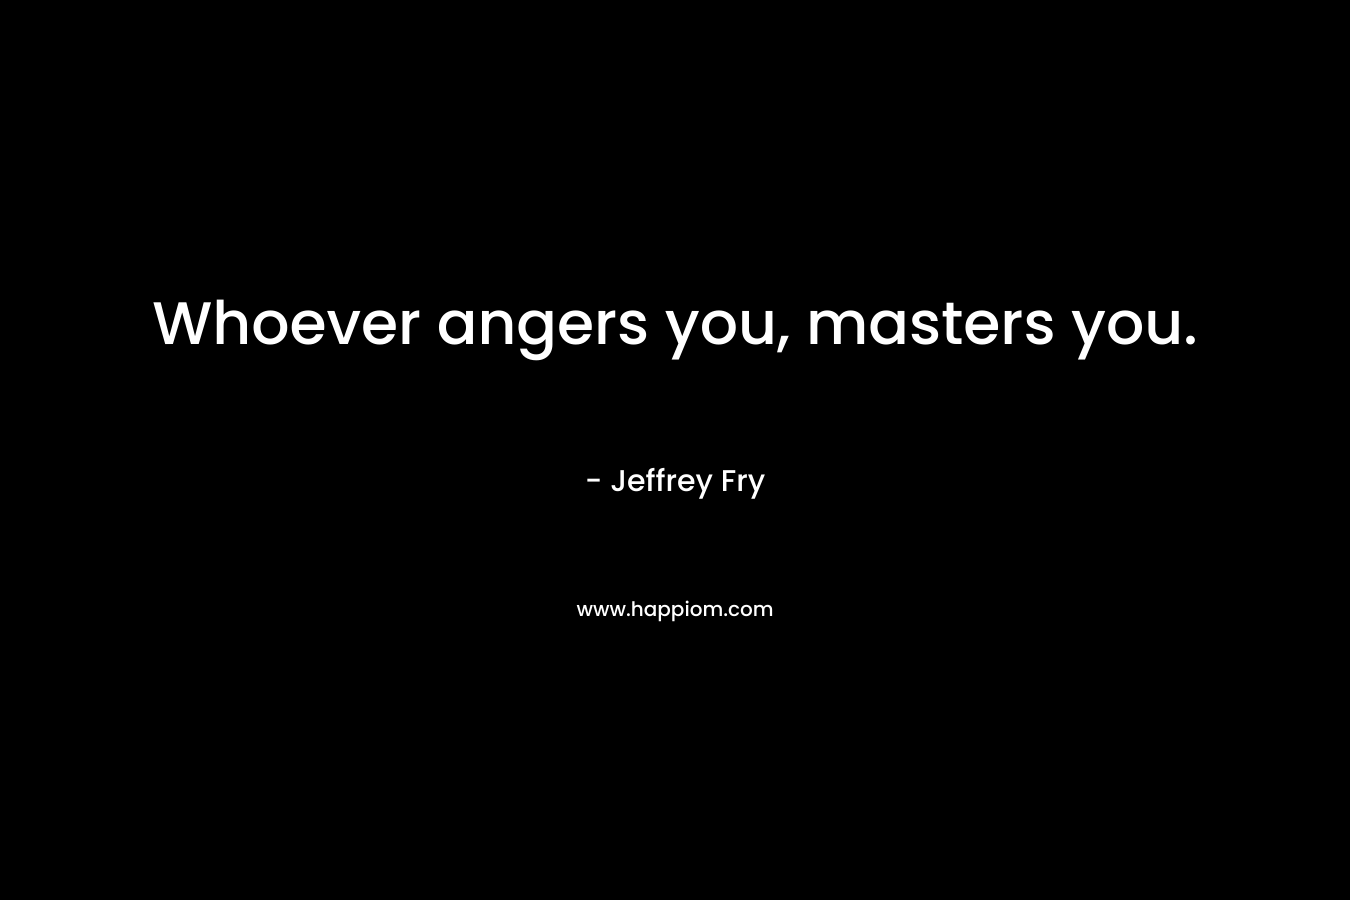 Whoever angers you, masters you. – Jeffrey Fry